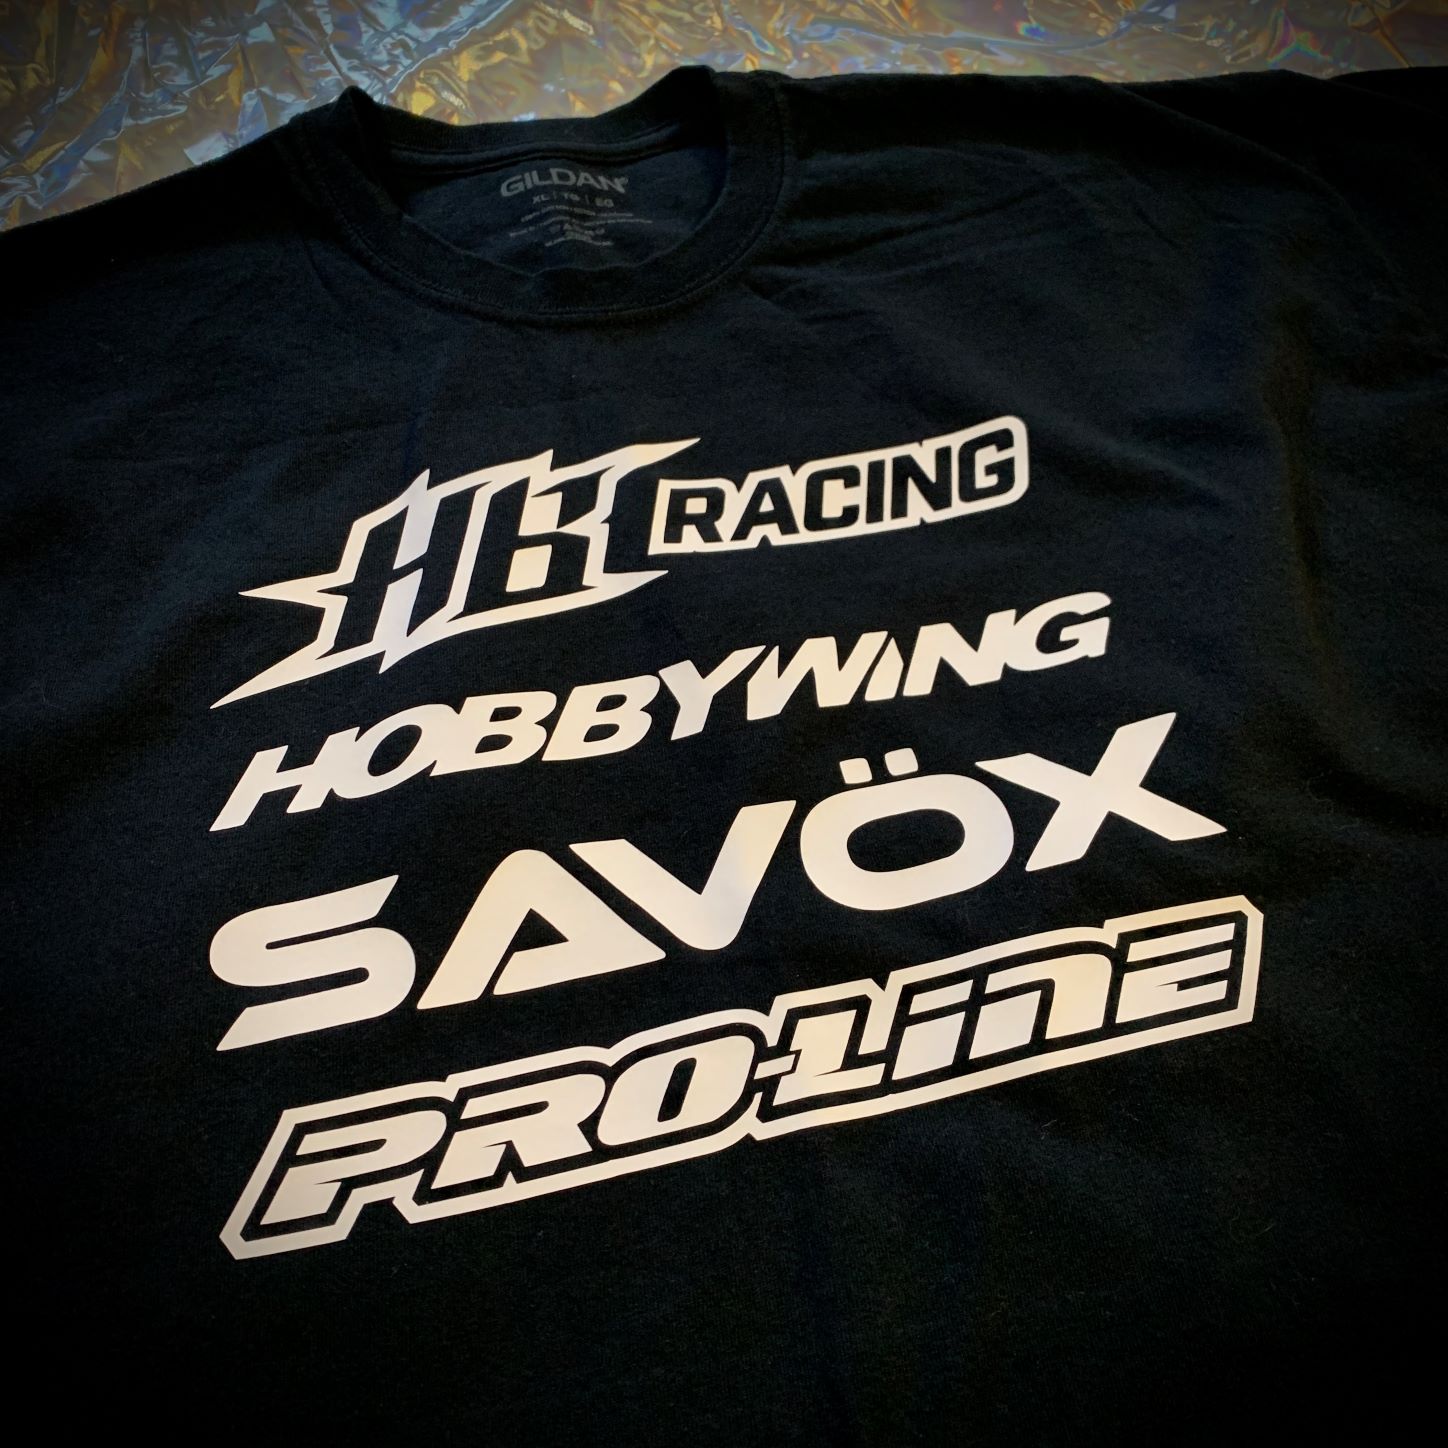 Paint Style Sponsor Logo T-Shirt - RC SWAG - Stickers, T-Shirts